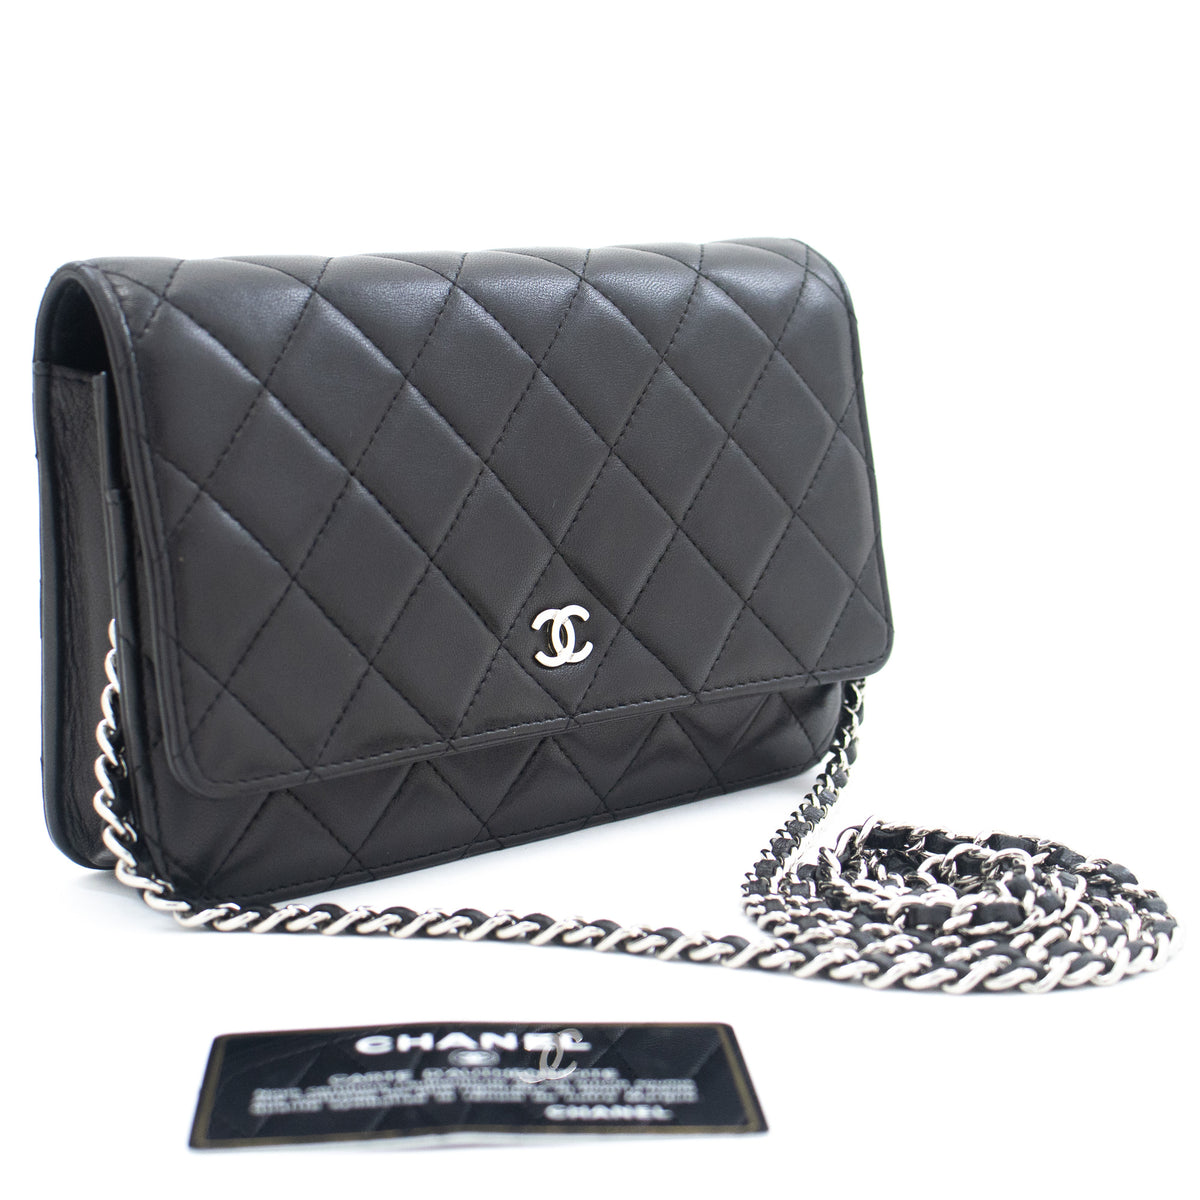 Chanel Wallet on Chain Black lambskin leather with gold hardware 8.5/10  condition Comes with receipt only $4700 pp